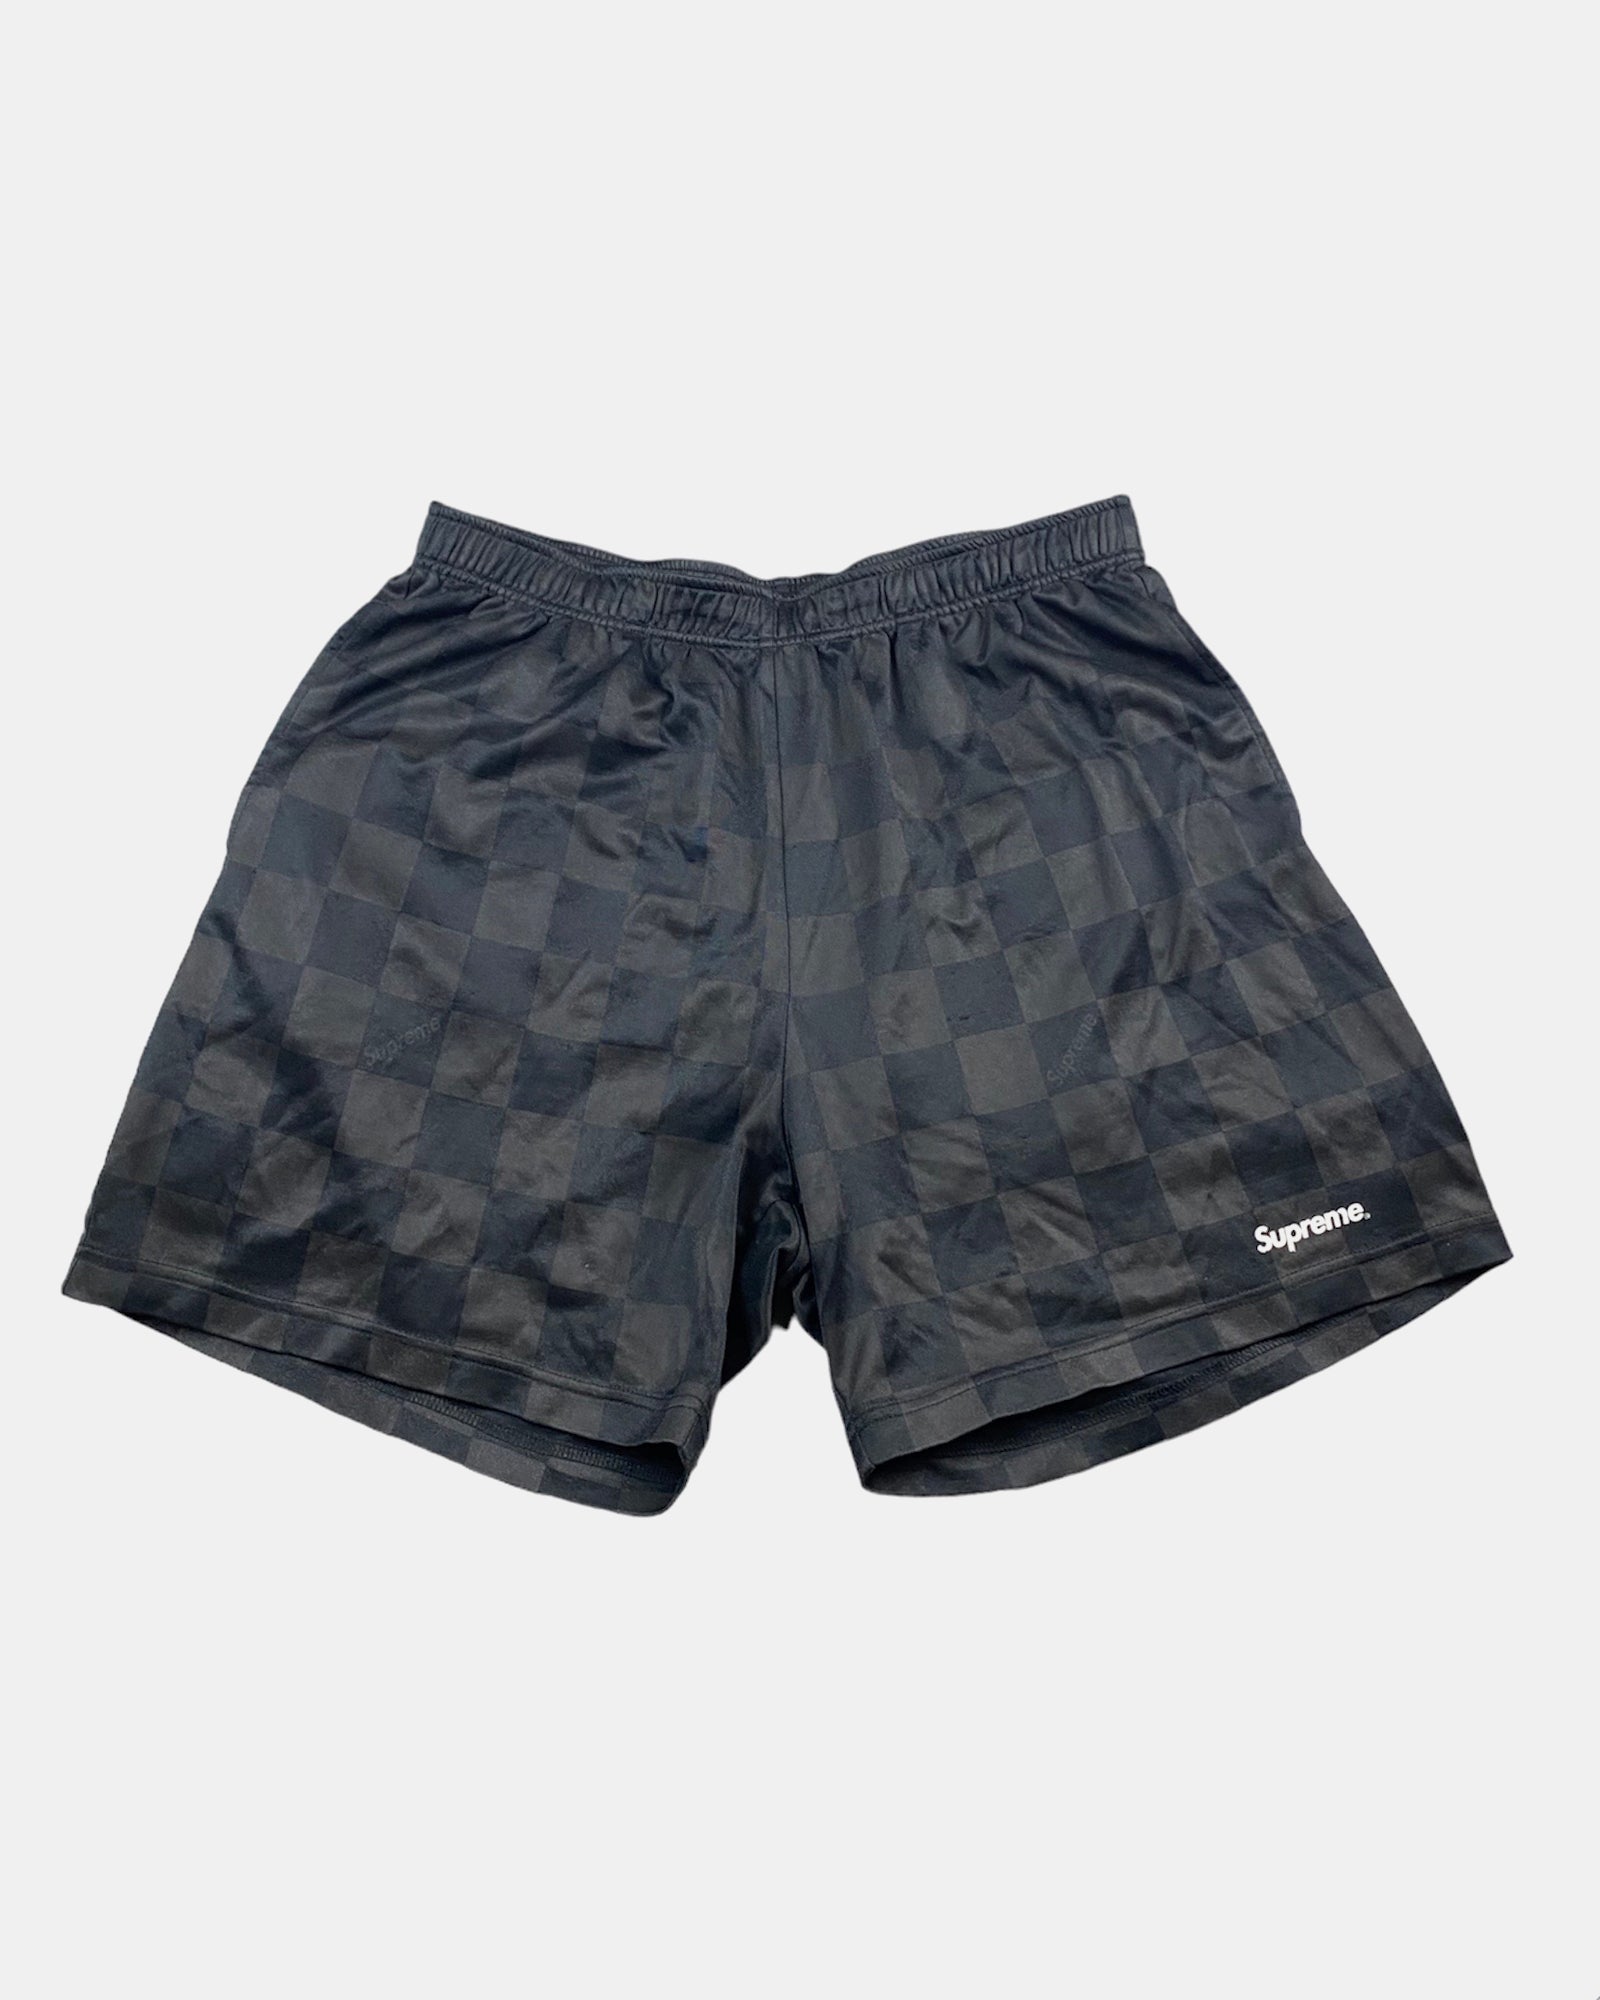 Supreme SS16 Checkered Soccer Shorts – By Couor